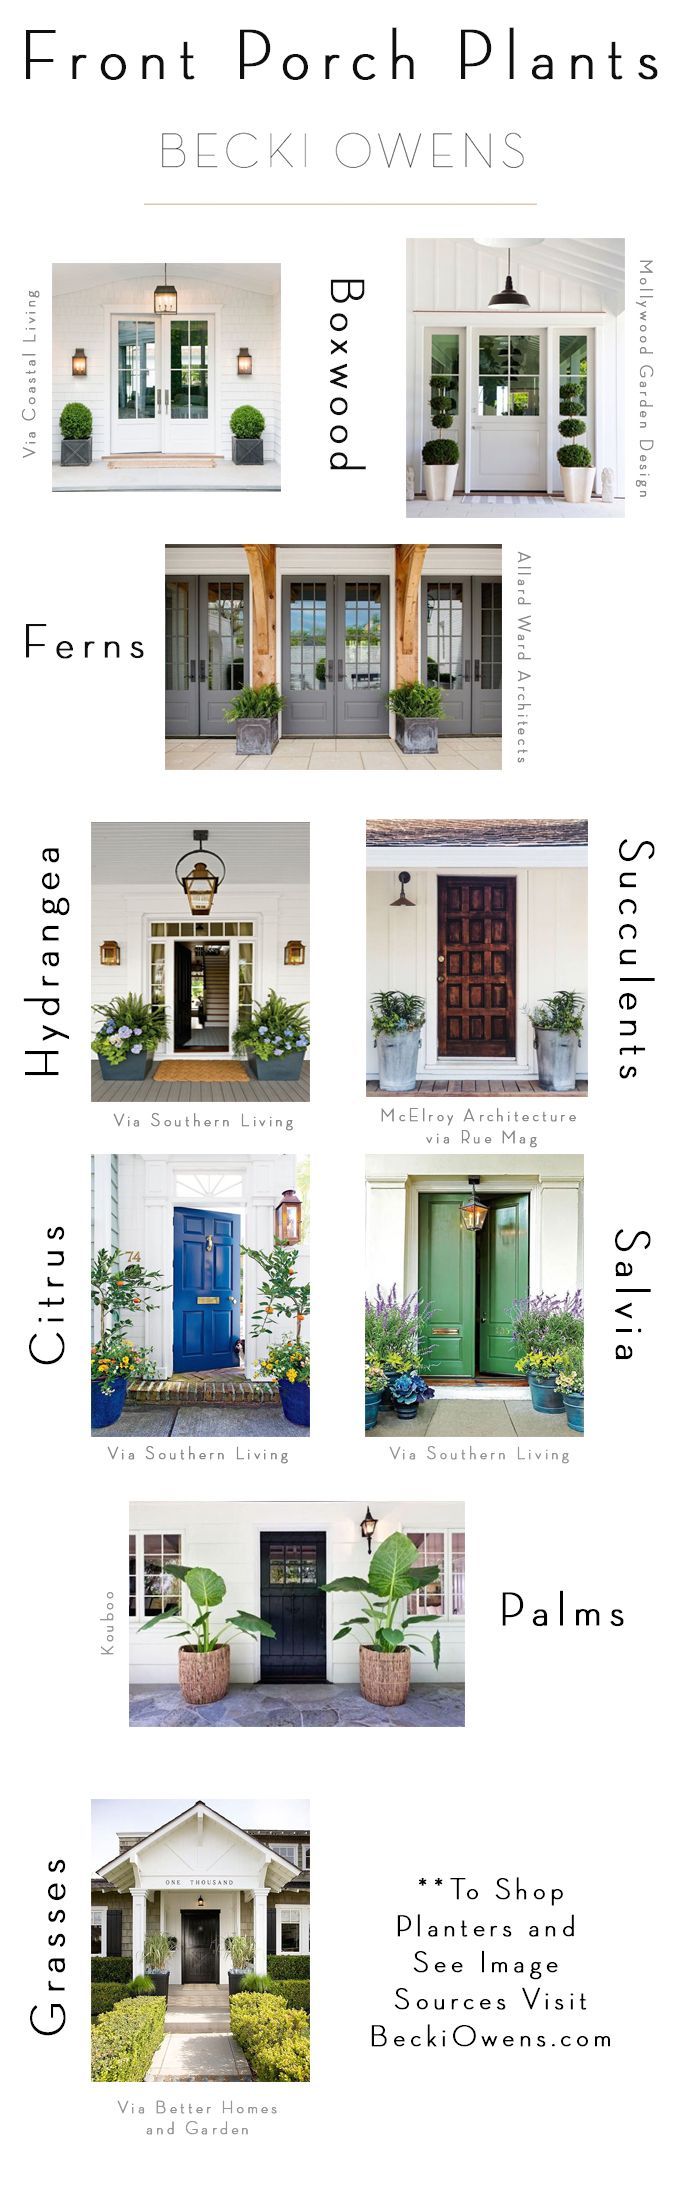 Make a huge impact with today’s affordable spring curb appeal tip. Flank your front door with seasonal greenery and flowers for an